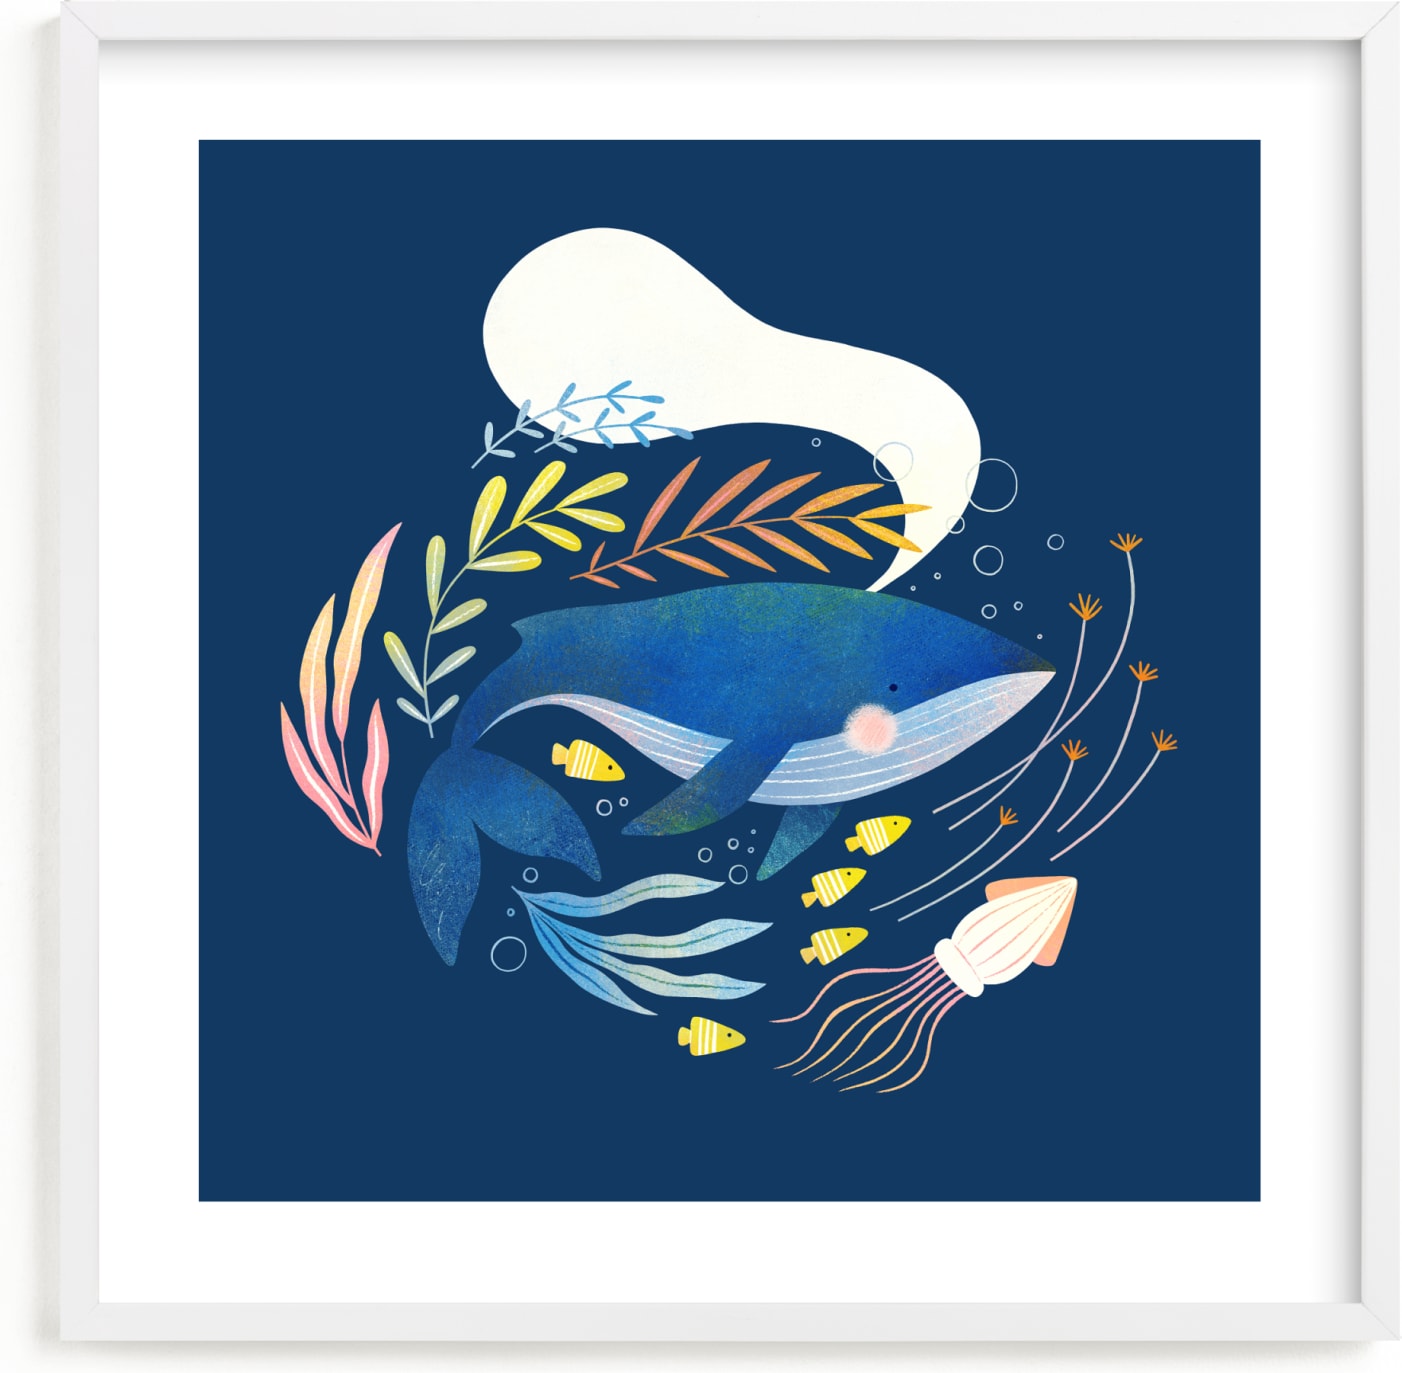 This is a blue kids wall art by Tati Abaurre called Ocean Blue.